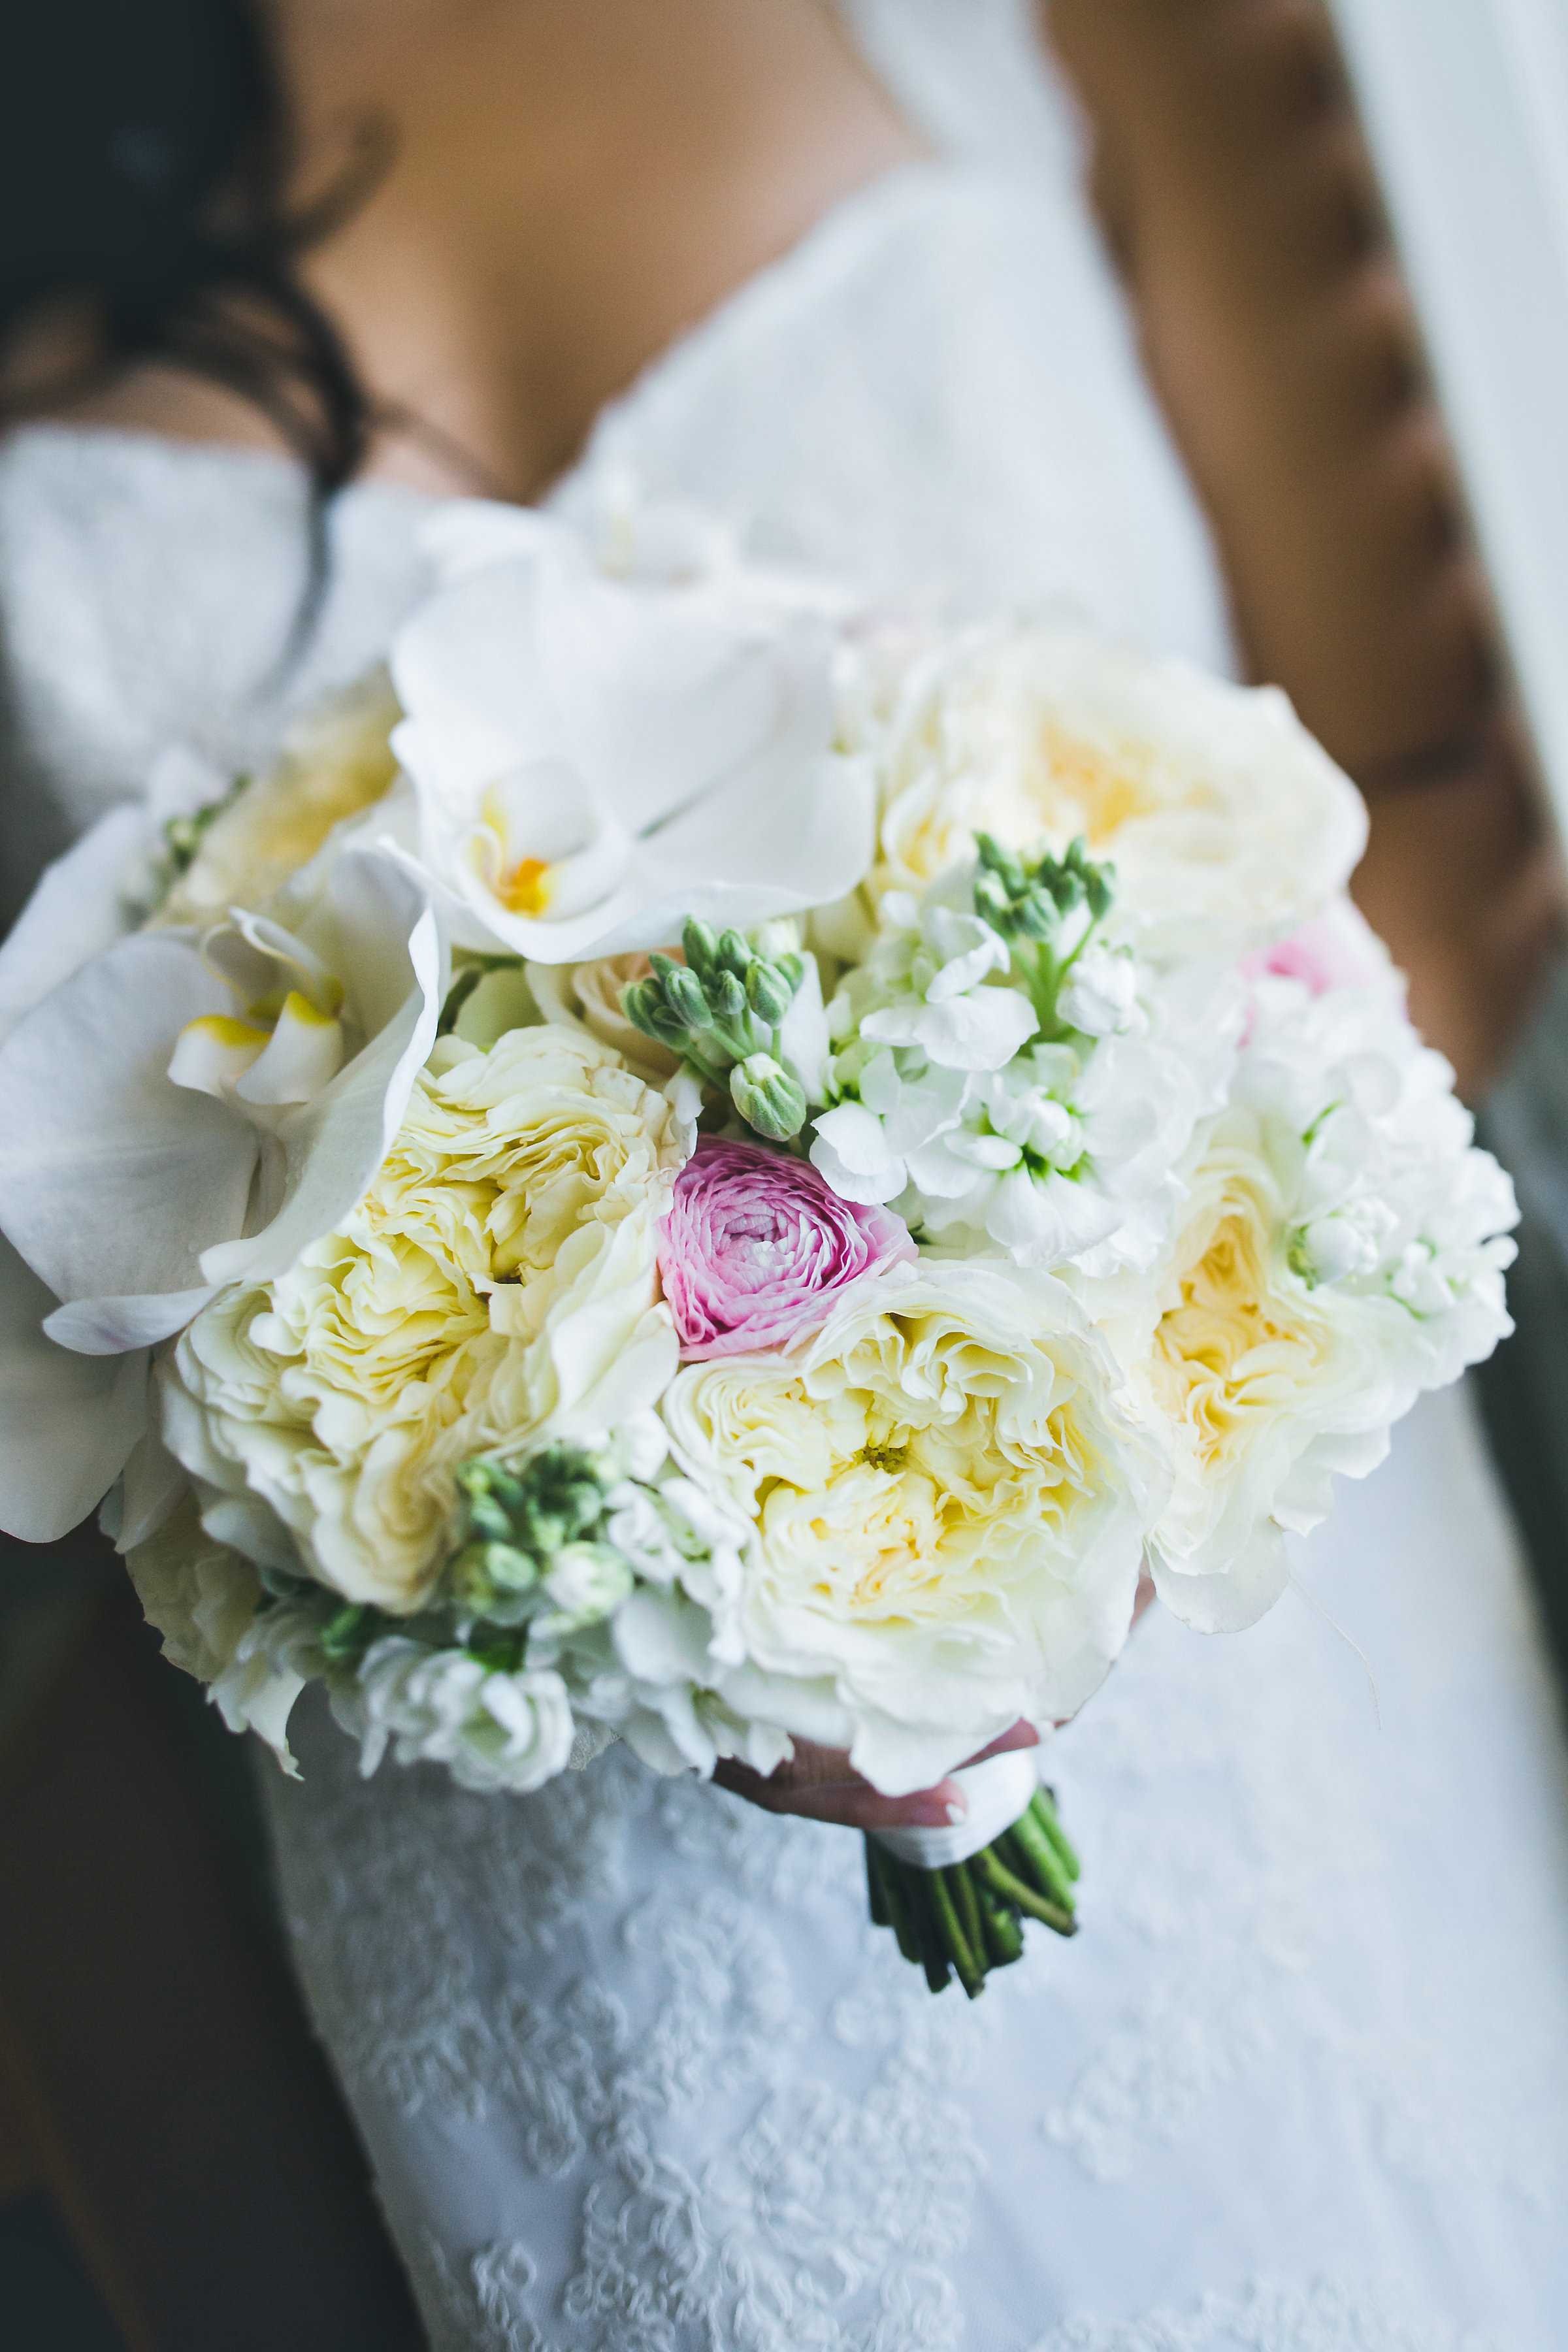 Bridal bouquet by Floral Inspirations